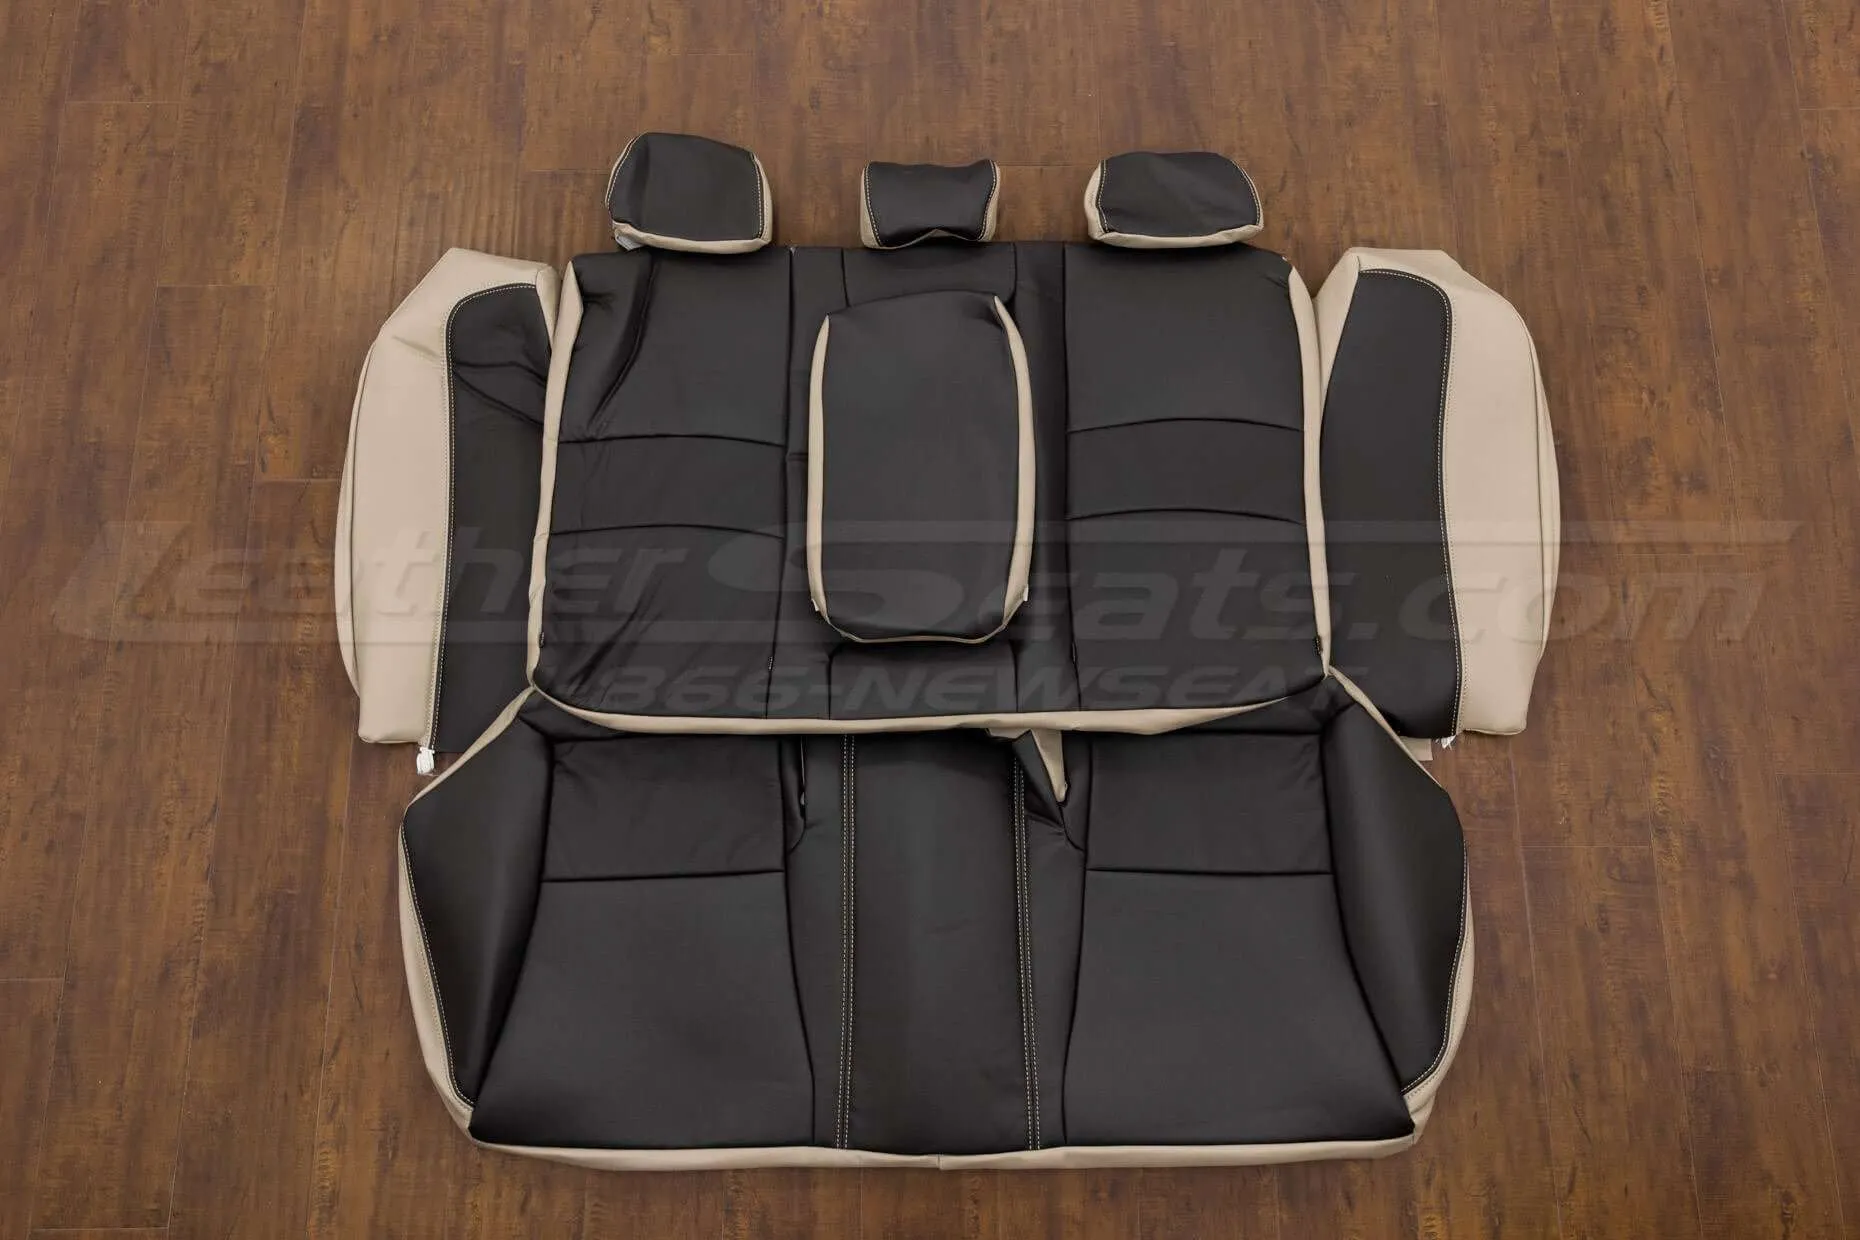 Honda Accord Leather Seat Kit - Ivory & Black - Rear seat upholstery with Armrest